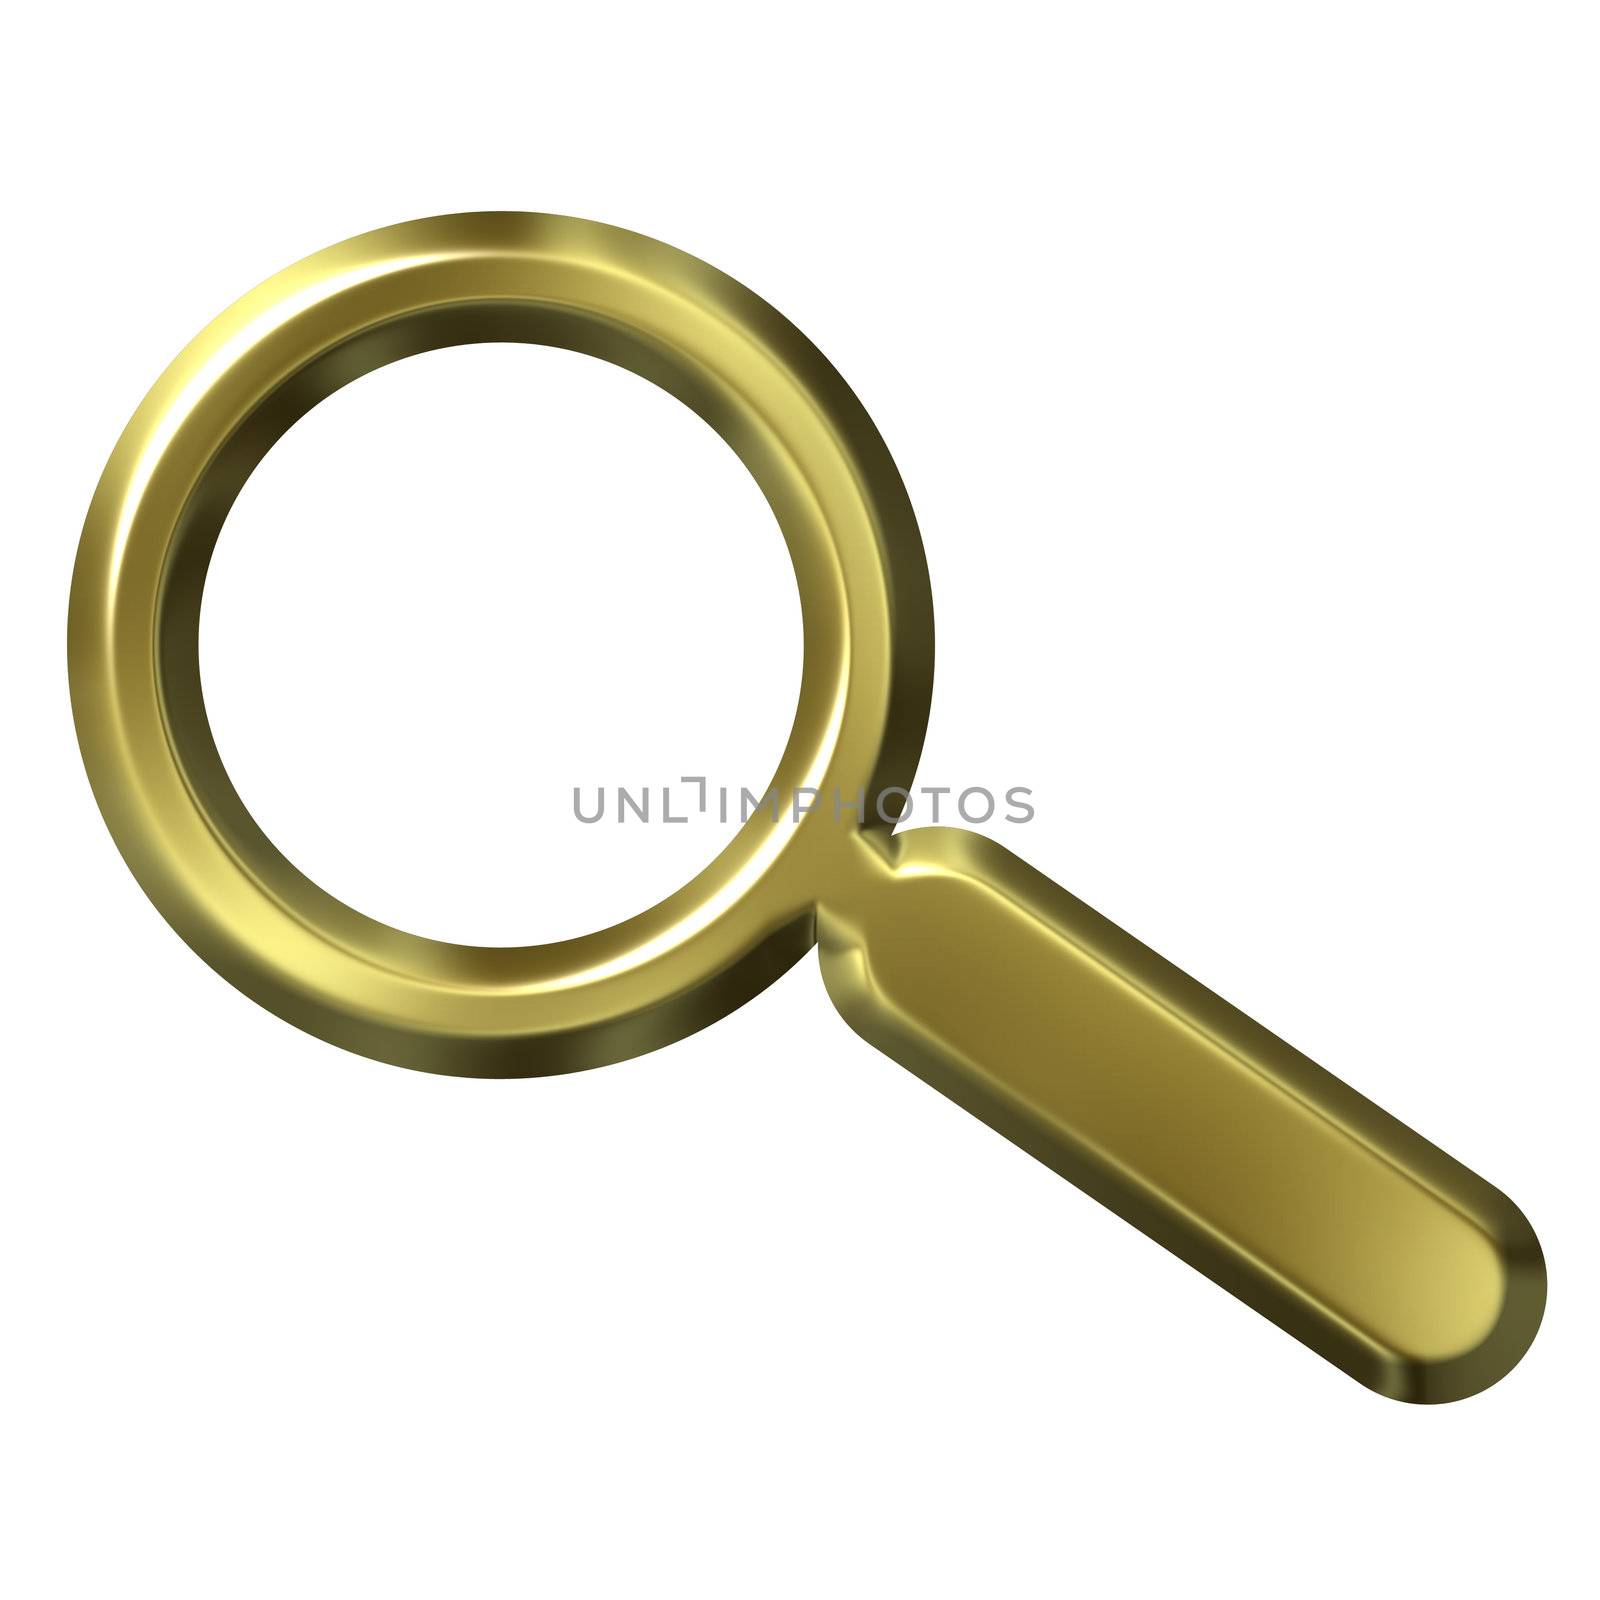 3d golden magnifying glass isolated in white